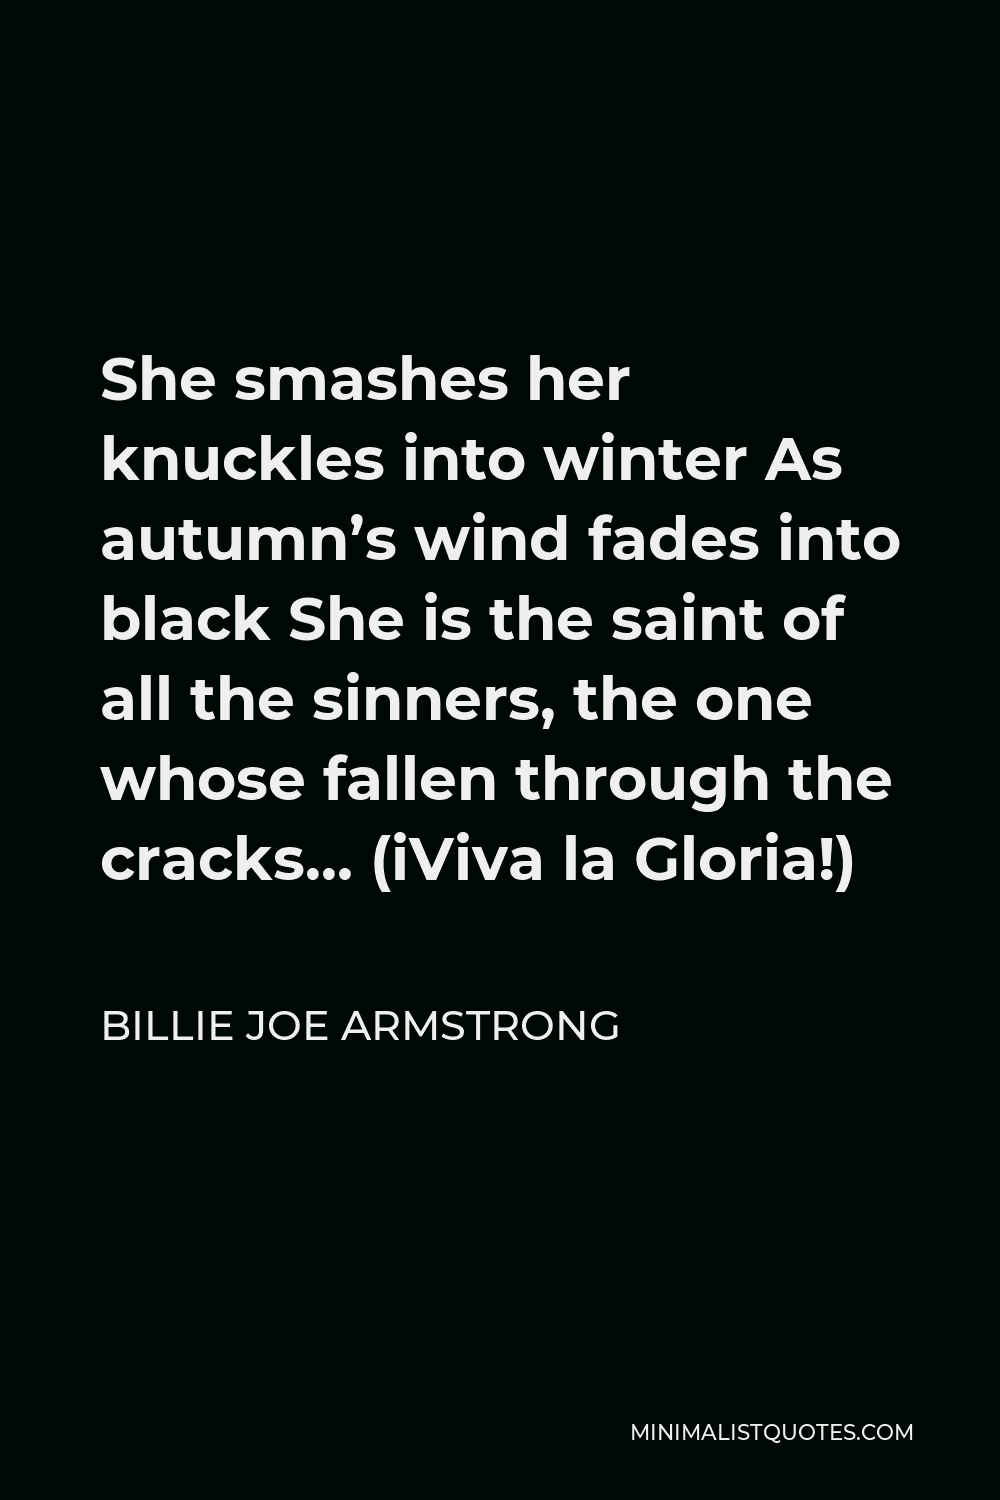 Billie Joe Armstrong Quote - She smashes her knuckles into winter As autumn’s wind fades into black She is the saint of all the sinners, the one whose fallen through the cracks… (iViva la Gloria!)